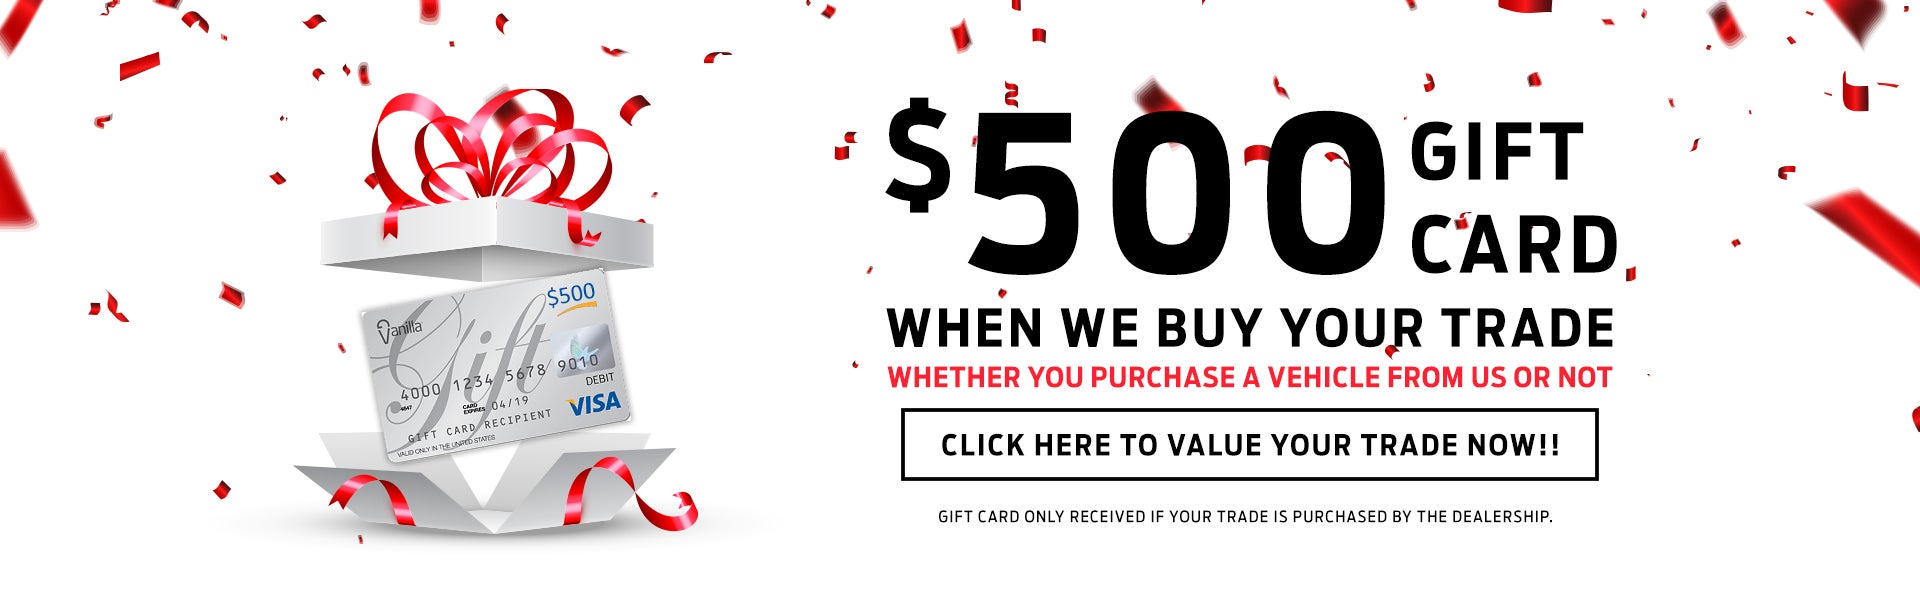 $500 Gift Card When We Buy Your Trade 